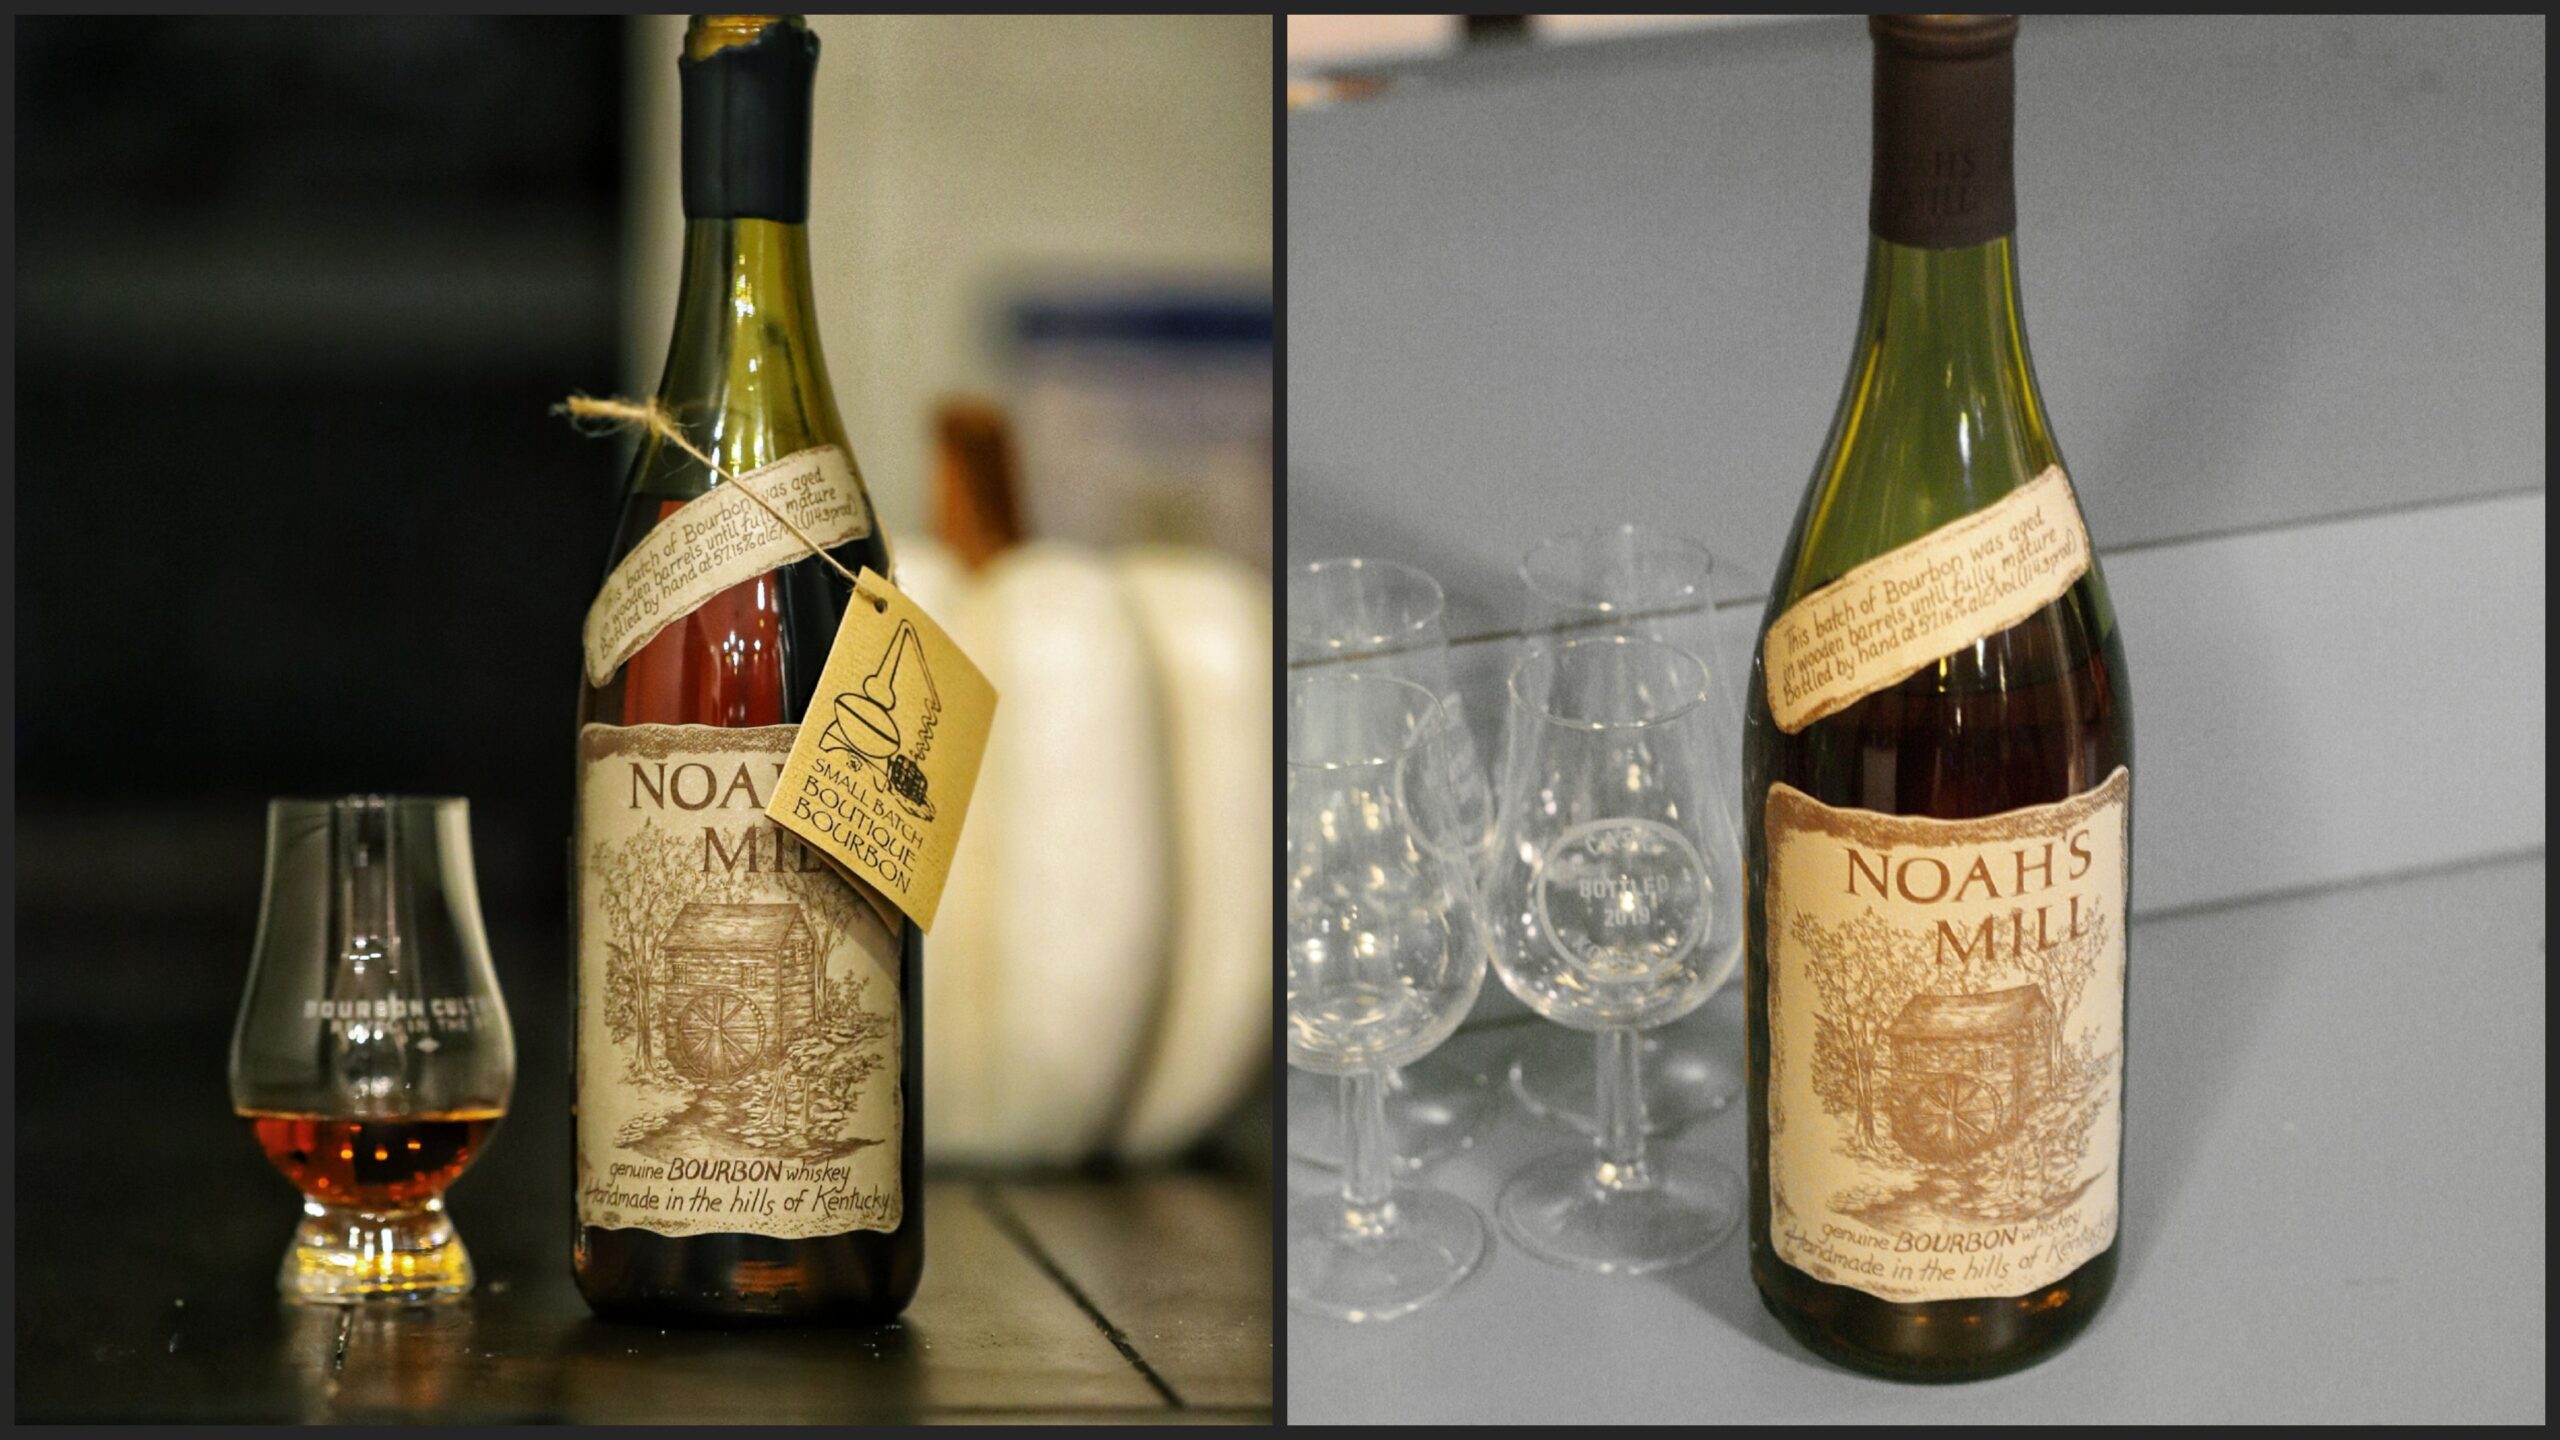 Noah’s Mill Bourbon (2010 and 2020 bottling) Review